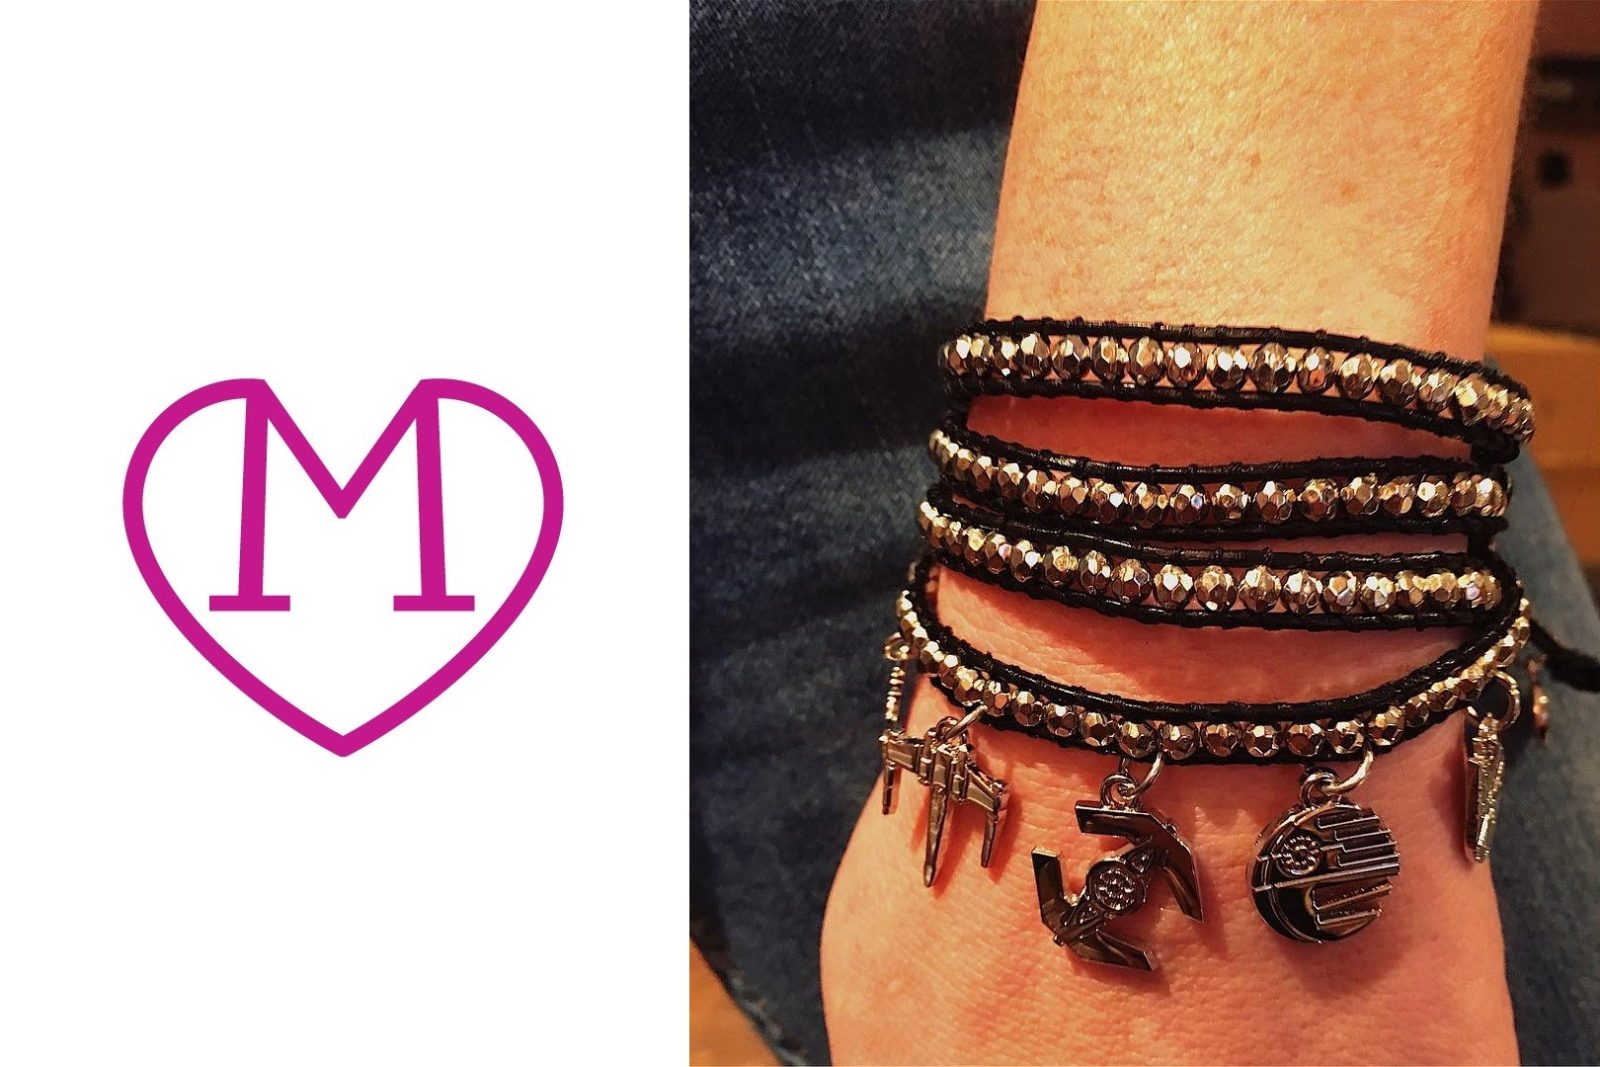 New Love And Madness wrap bracelet!